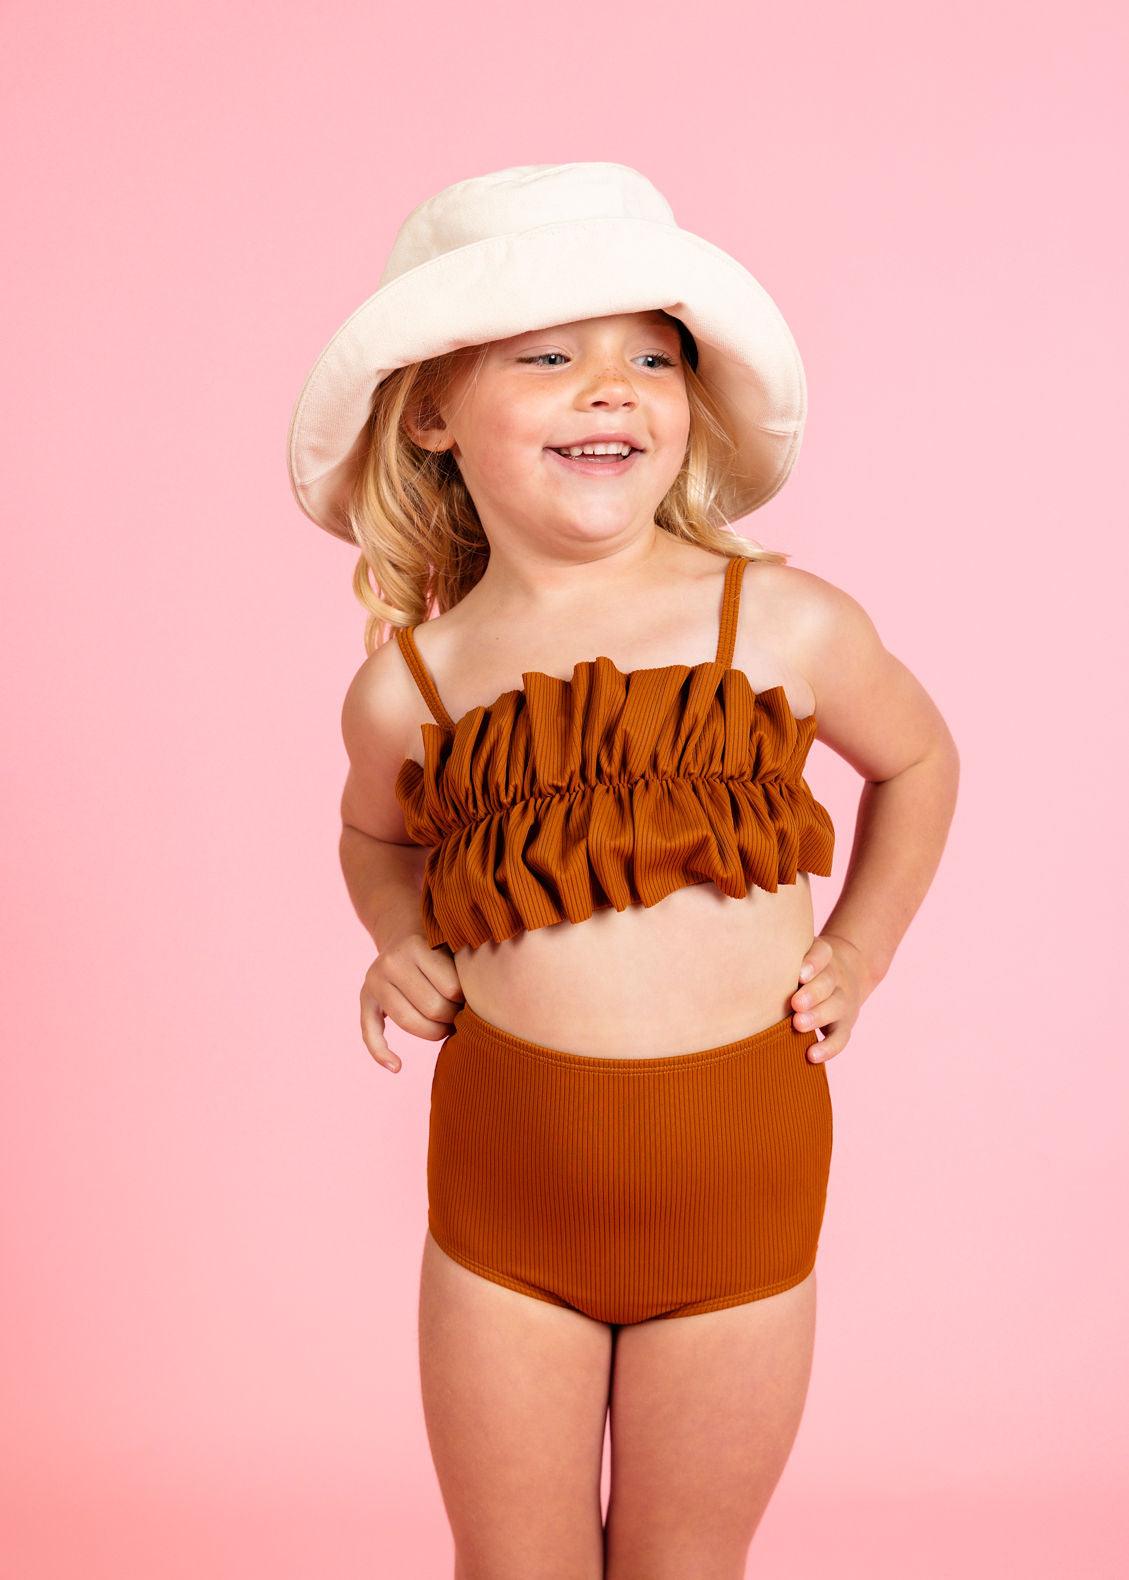 Girls High-Waisted Swimsuit Bottoms - Ribbed Caramel